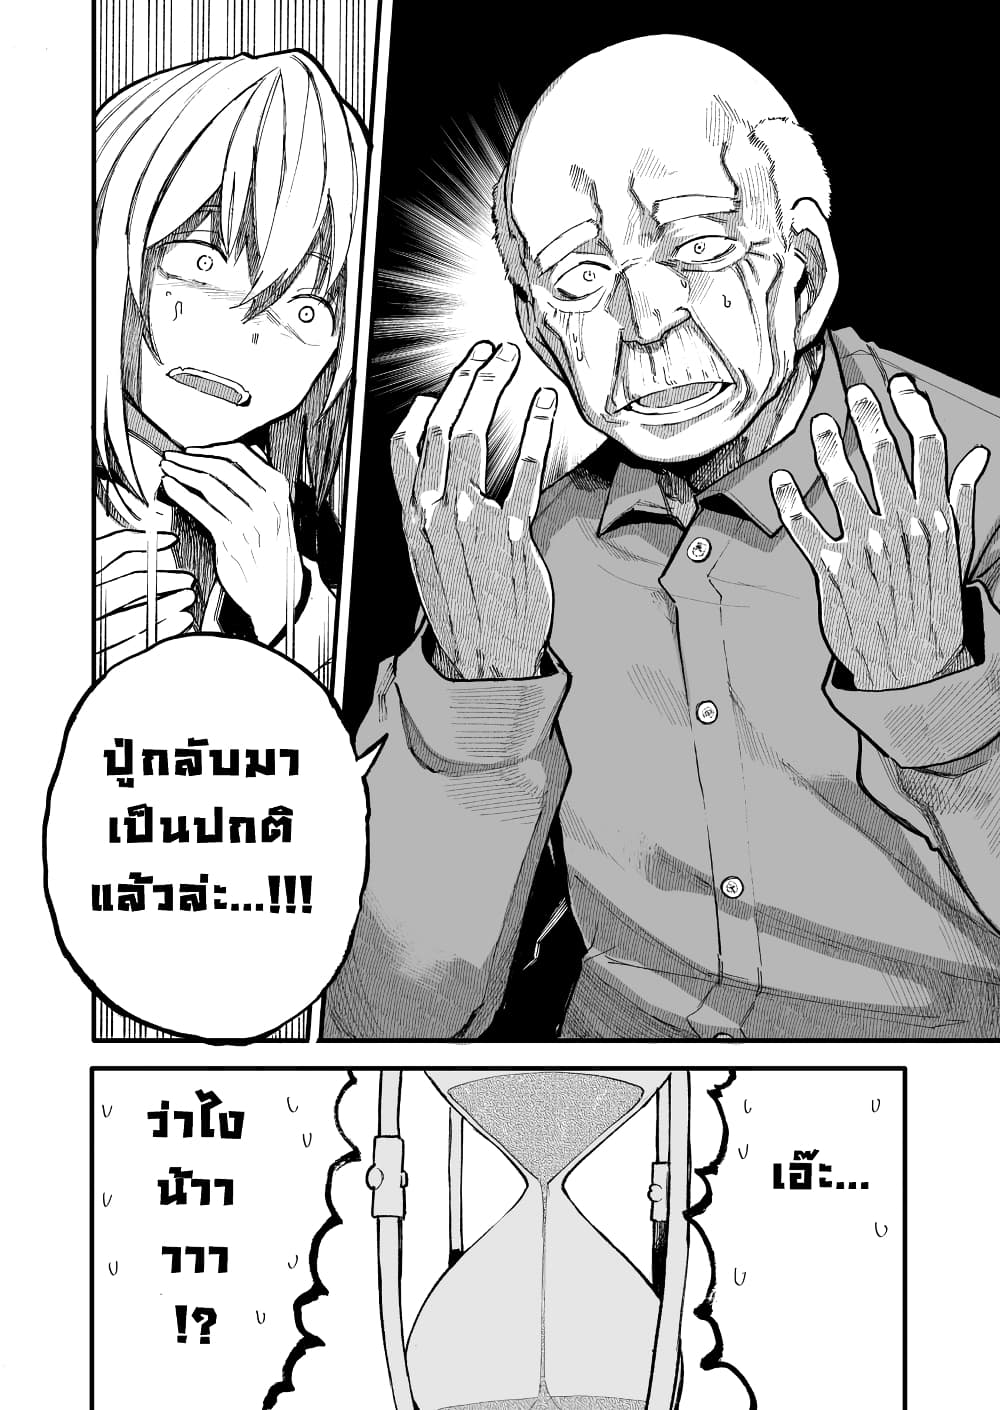 A Story About A Grampa and Granma Returned Back to their Youth คู่รักวัยดึกหวนคืนวัยหวาน 46-46